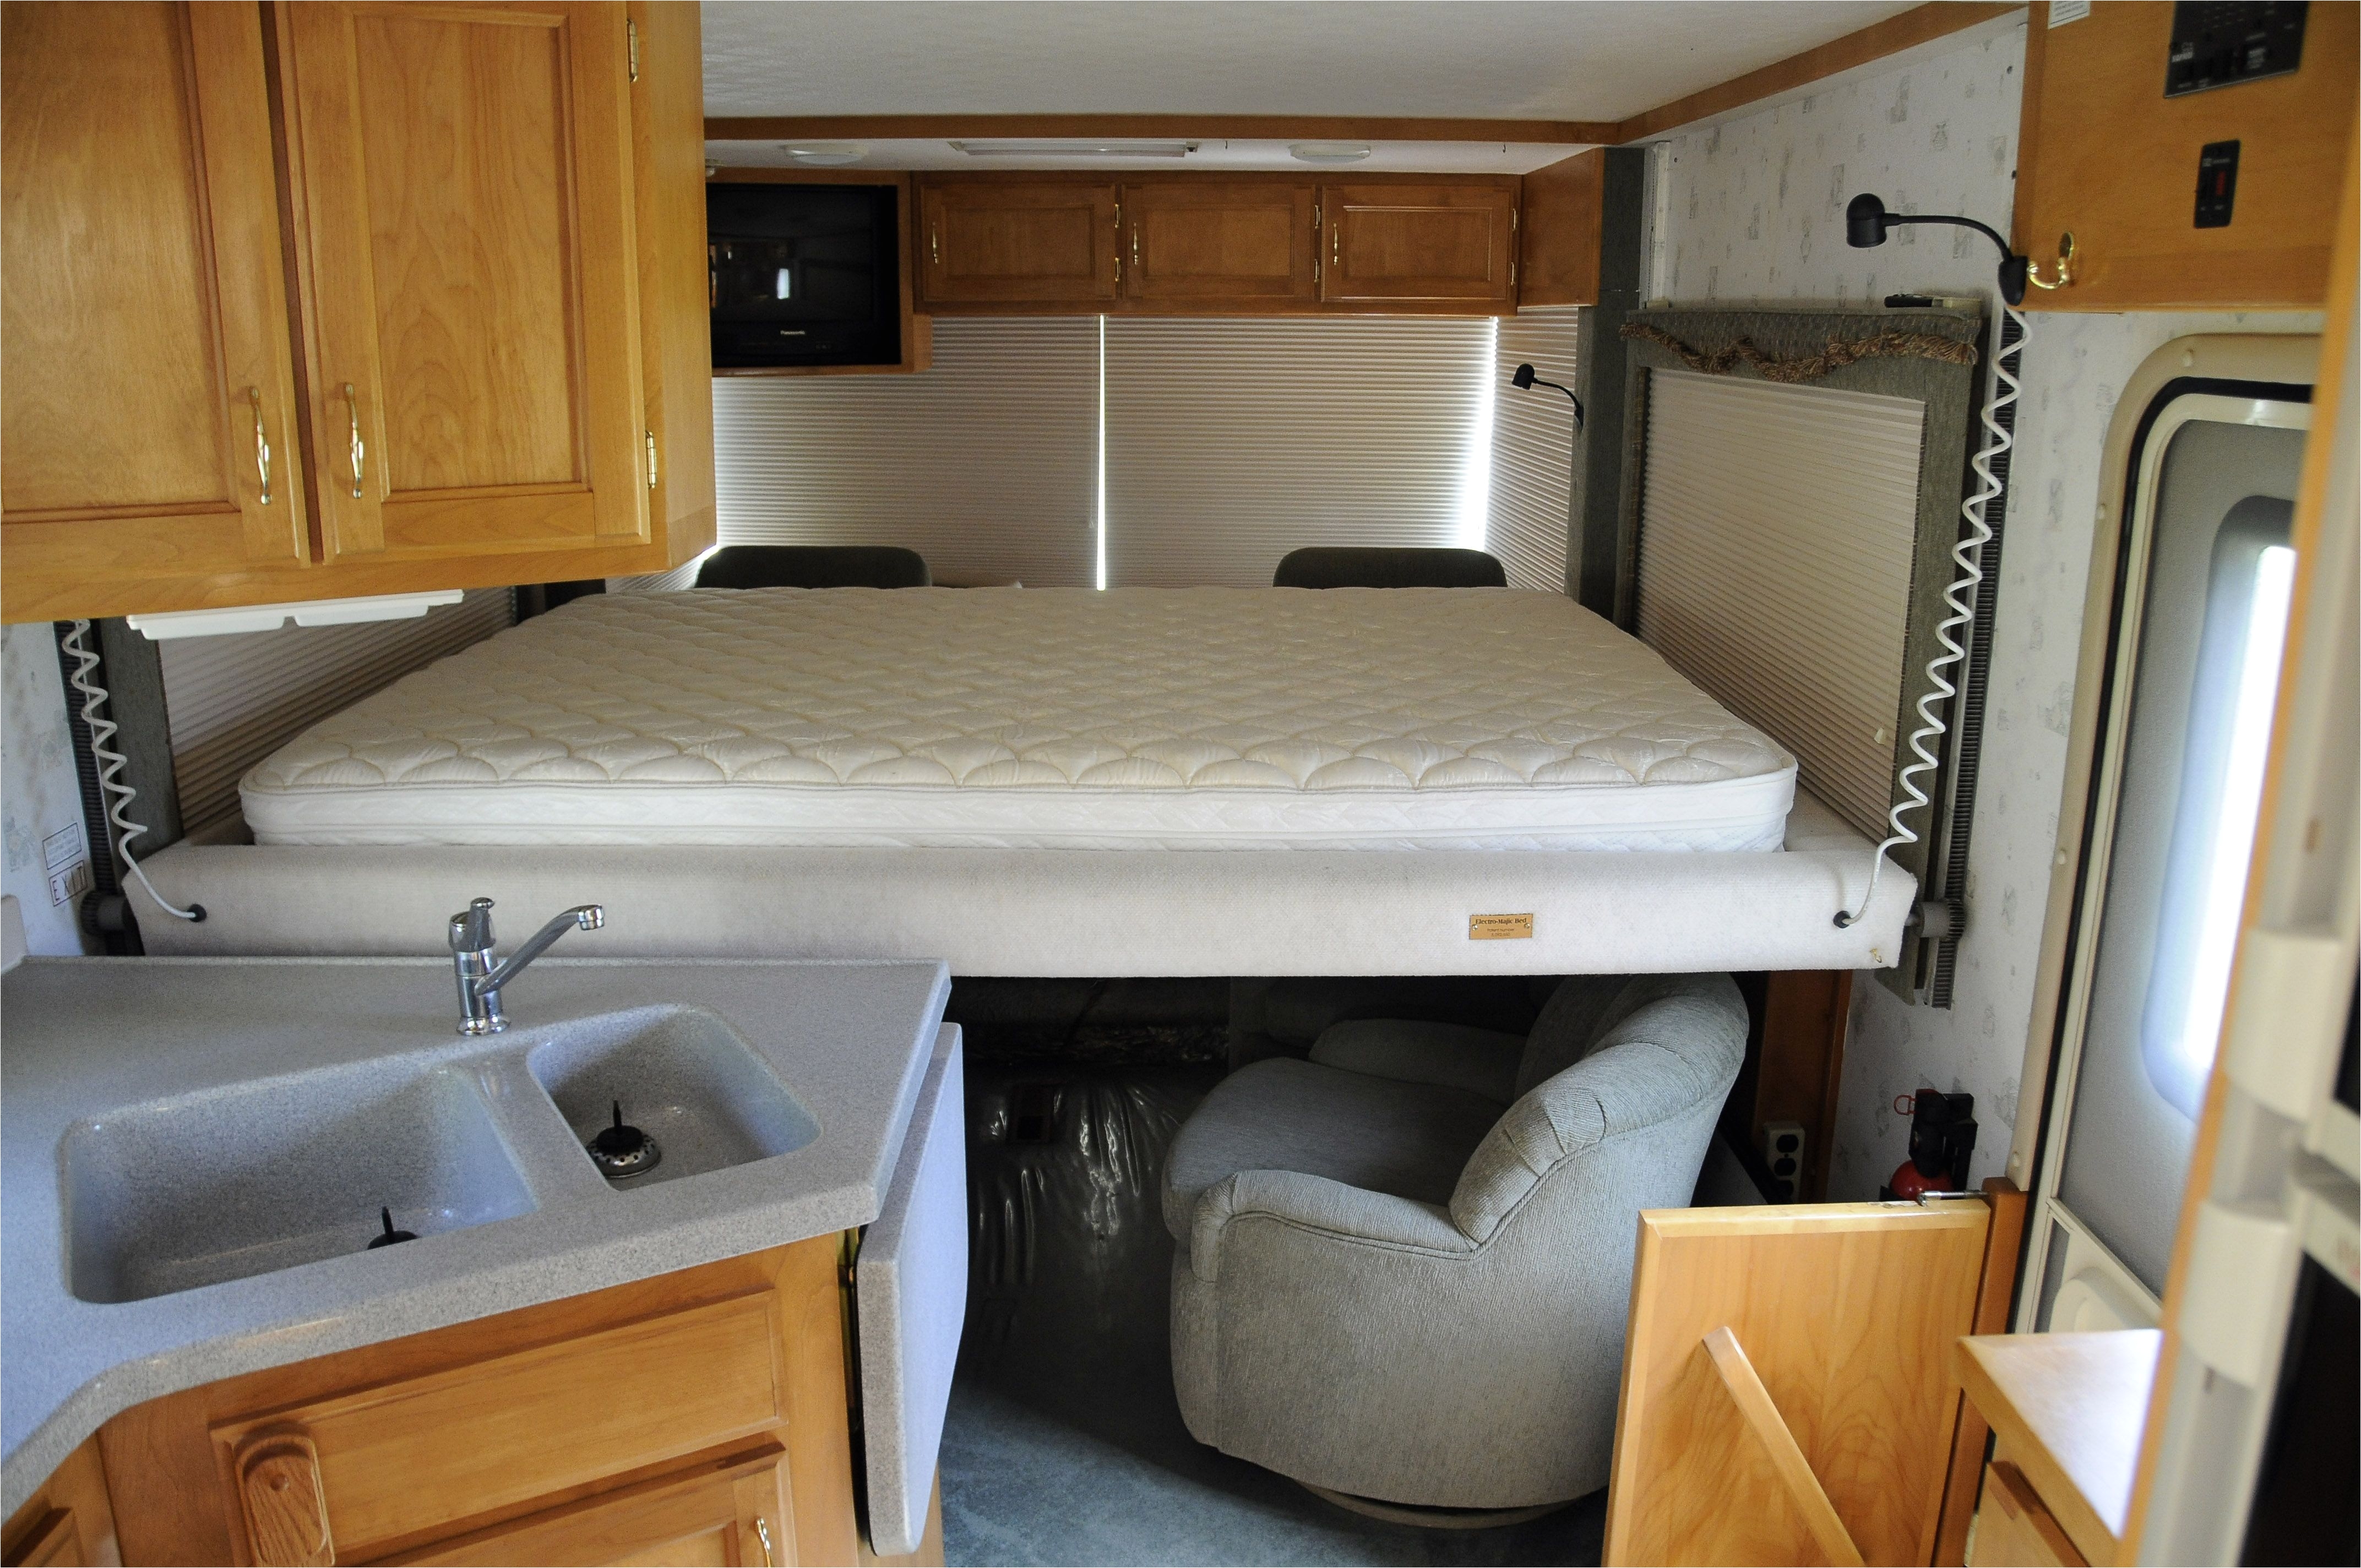 camper interior layout 1999 safari trek rv interior with bed lowered you can also see the